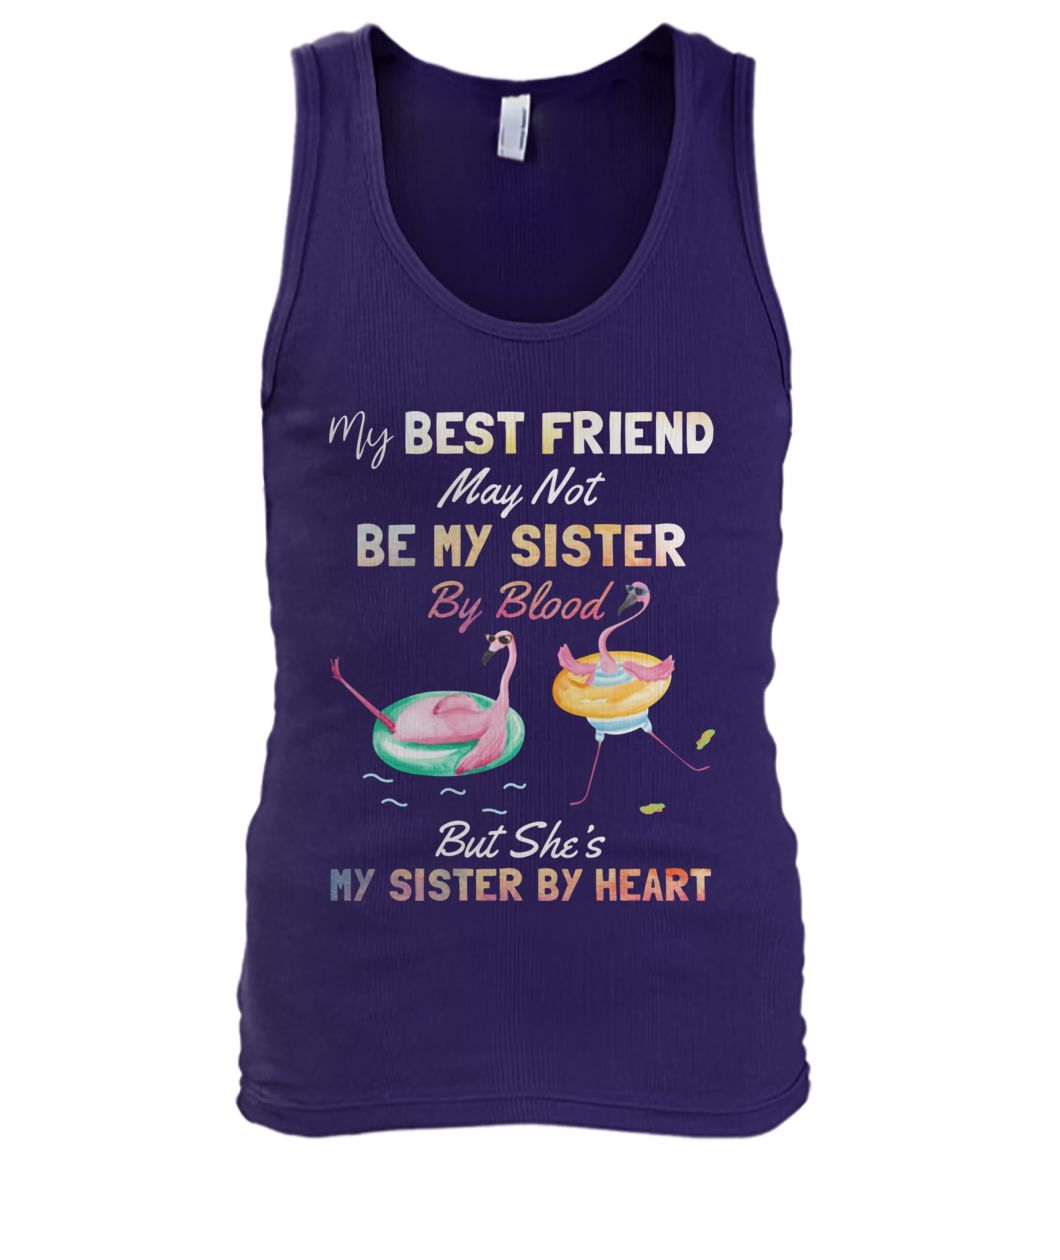 Flamingo my best friend may not be my sister by blood but she's my sister by heart men's tank top